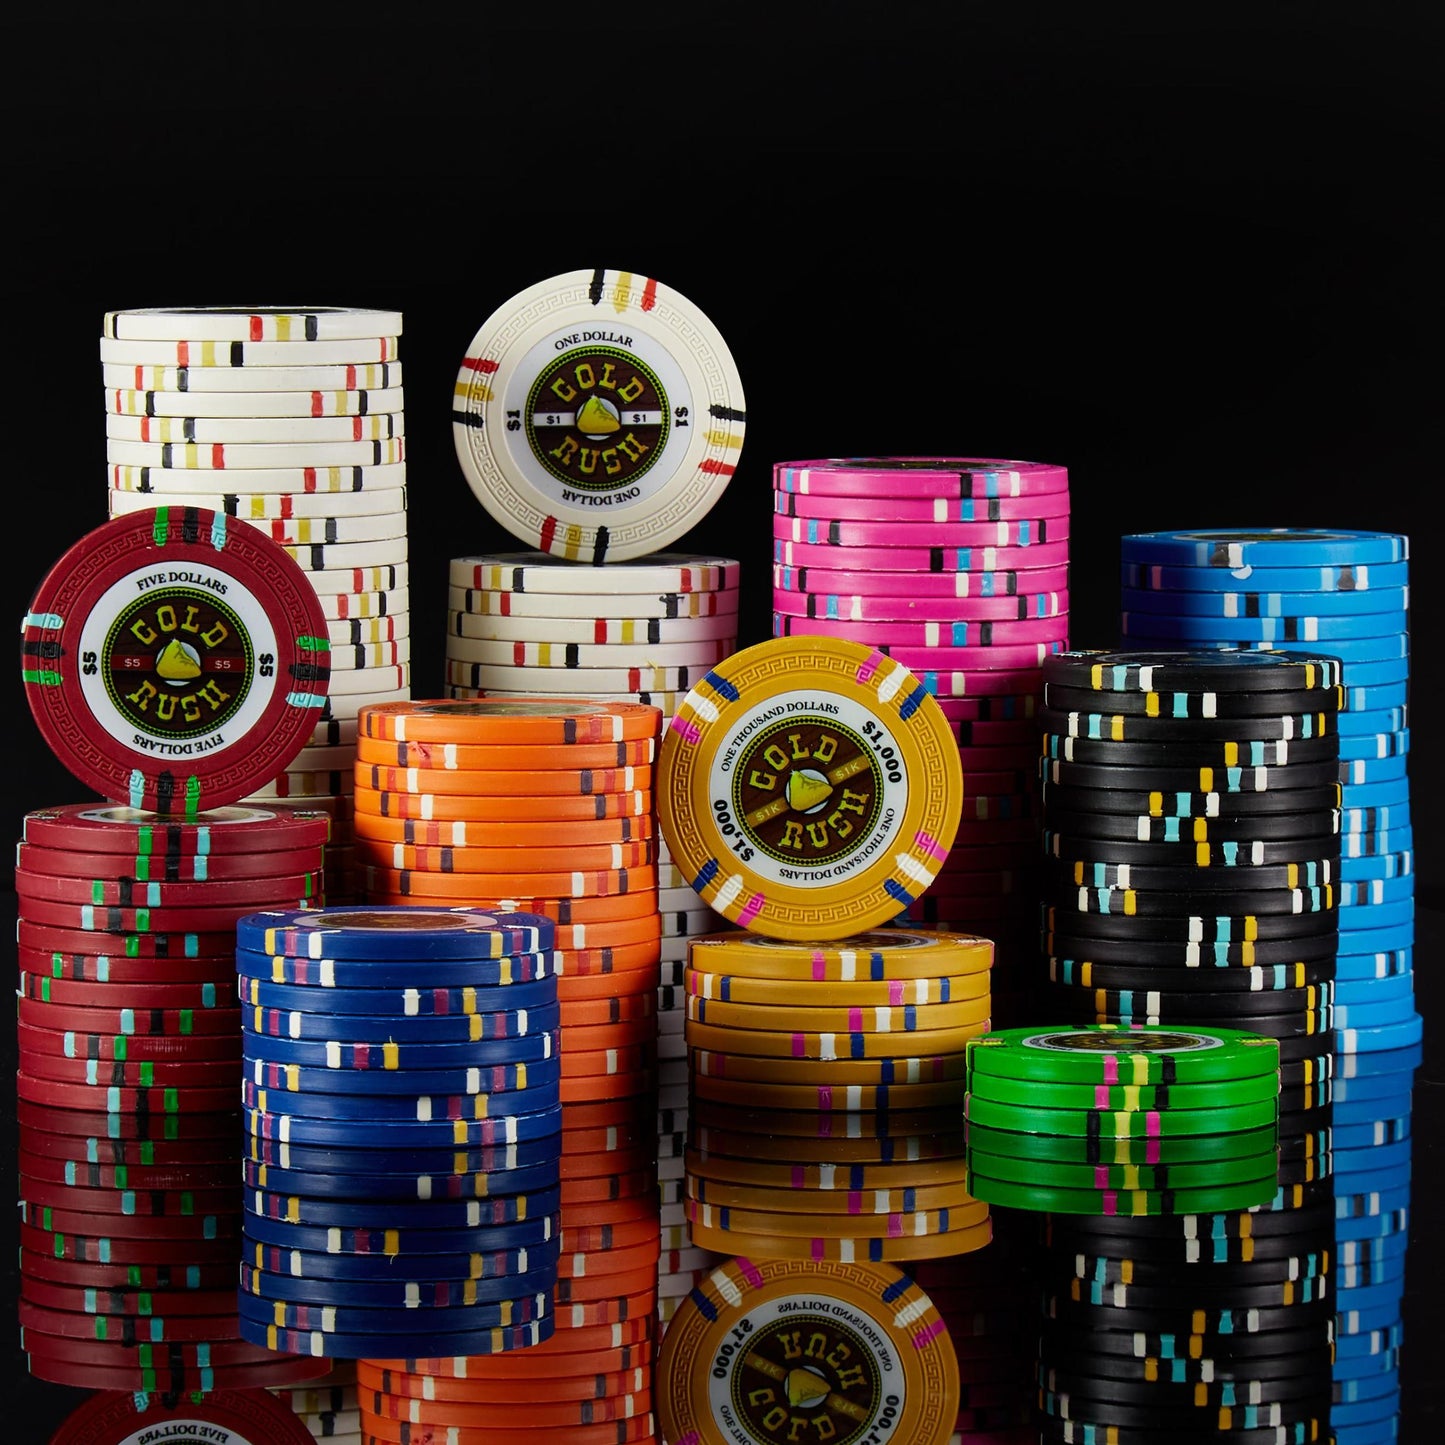 600 Gold Rush Poker Chips with Aluminum Case